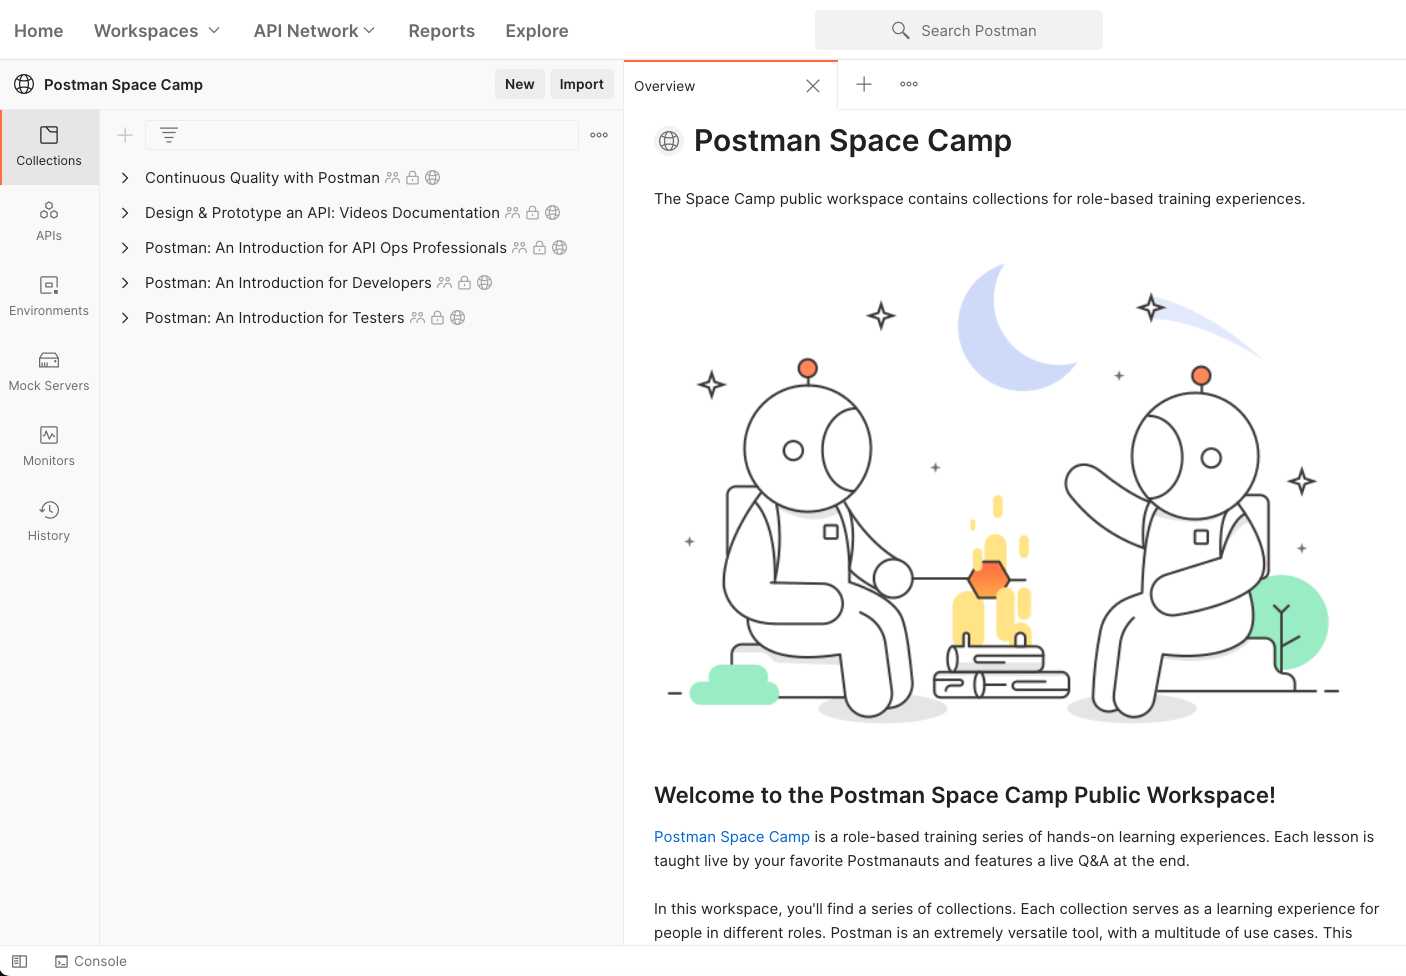 The Postman Space Camp public workspace overview page